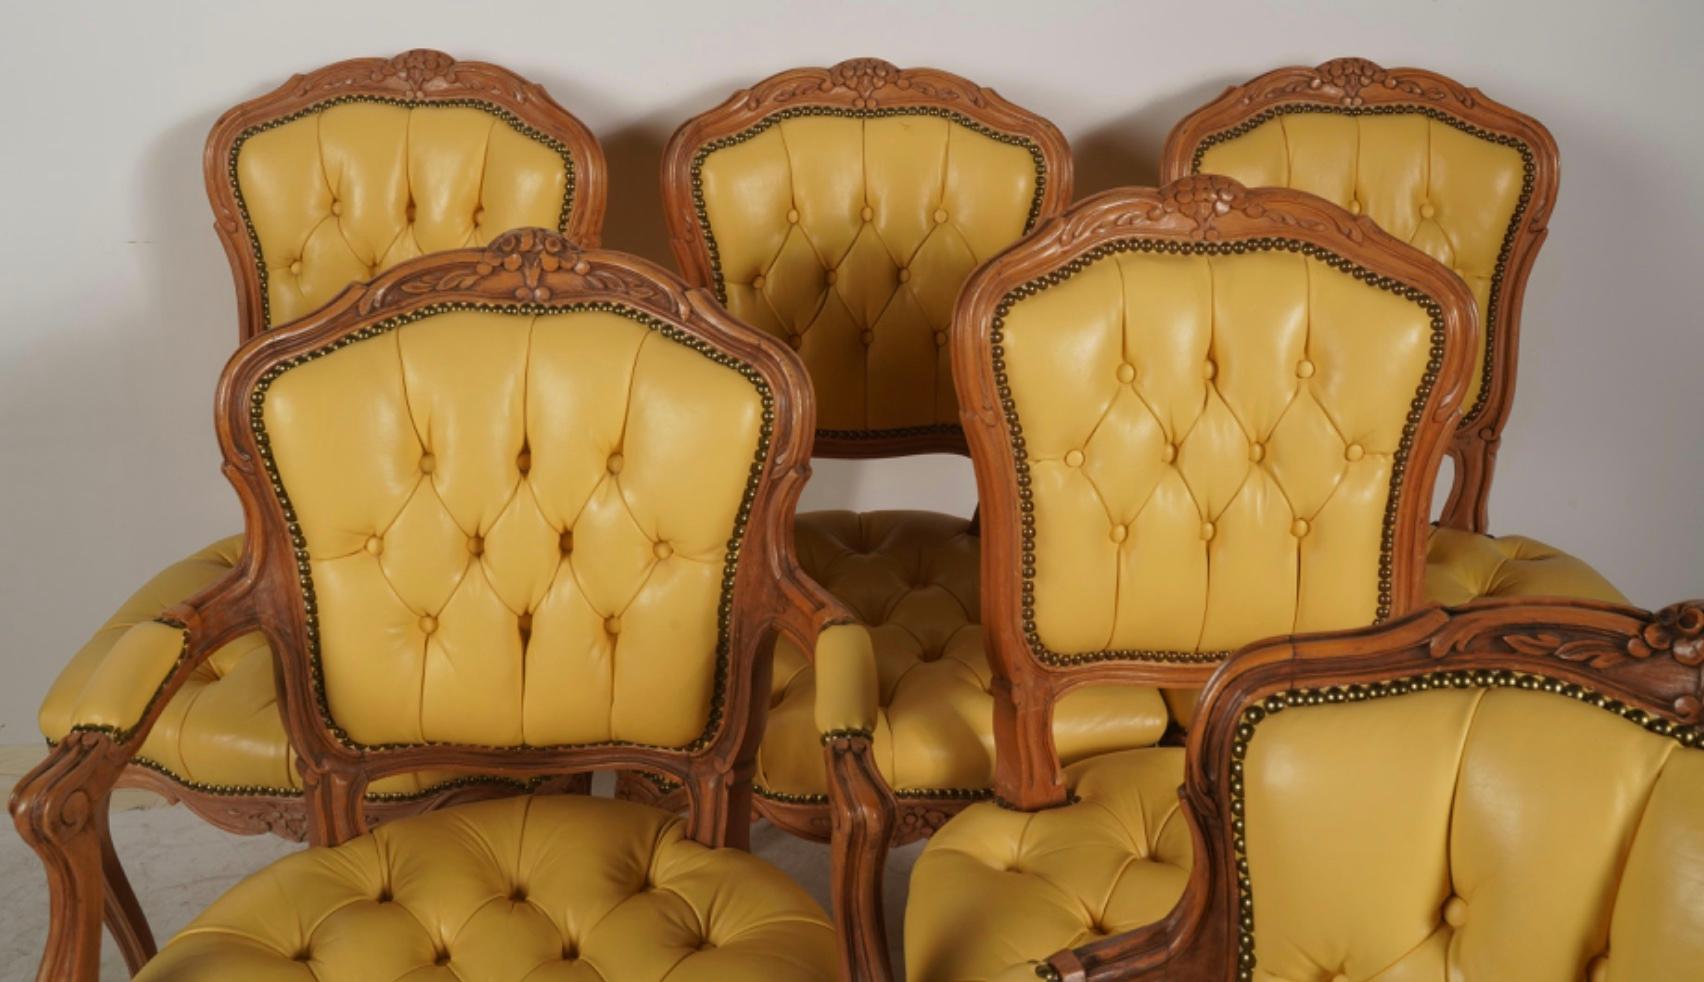 Set of 6 French Provincial Style Tufted Yellow Leather Arm Chair Fauteuils For Sale 1